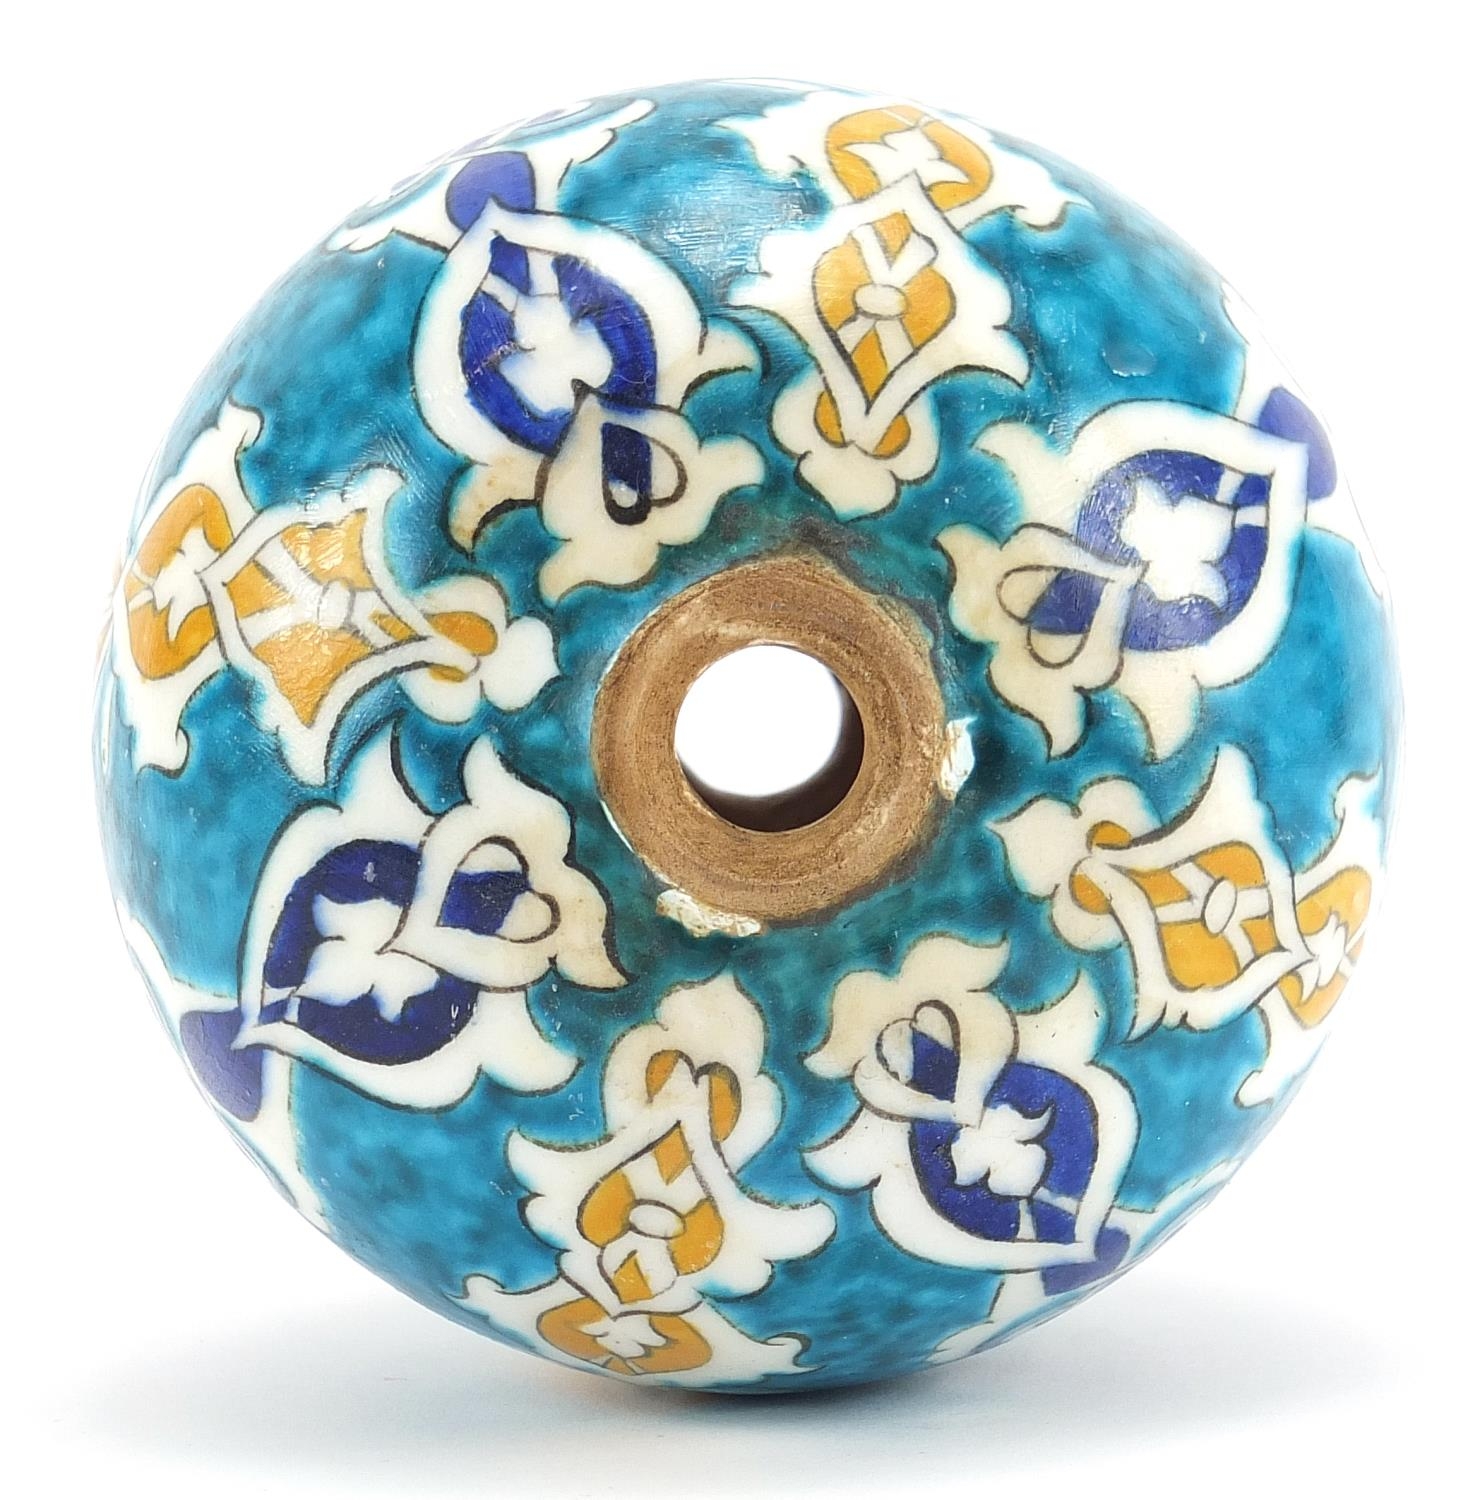 Turkish Iznik pottery hanging ball hand painted with flowers, 12.5cm high - Image 3 of 3